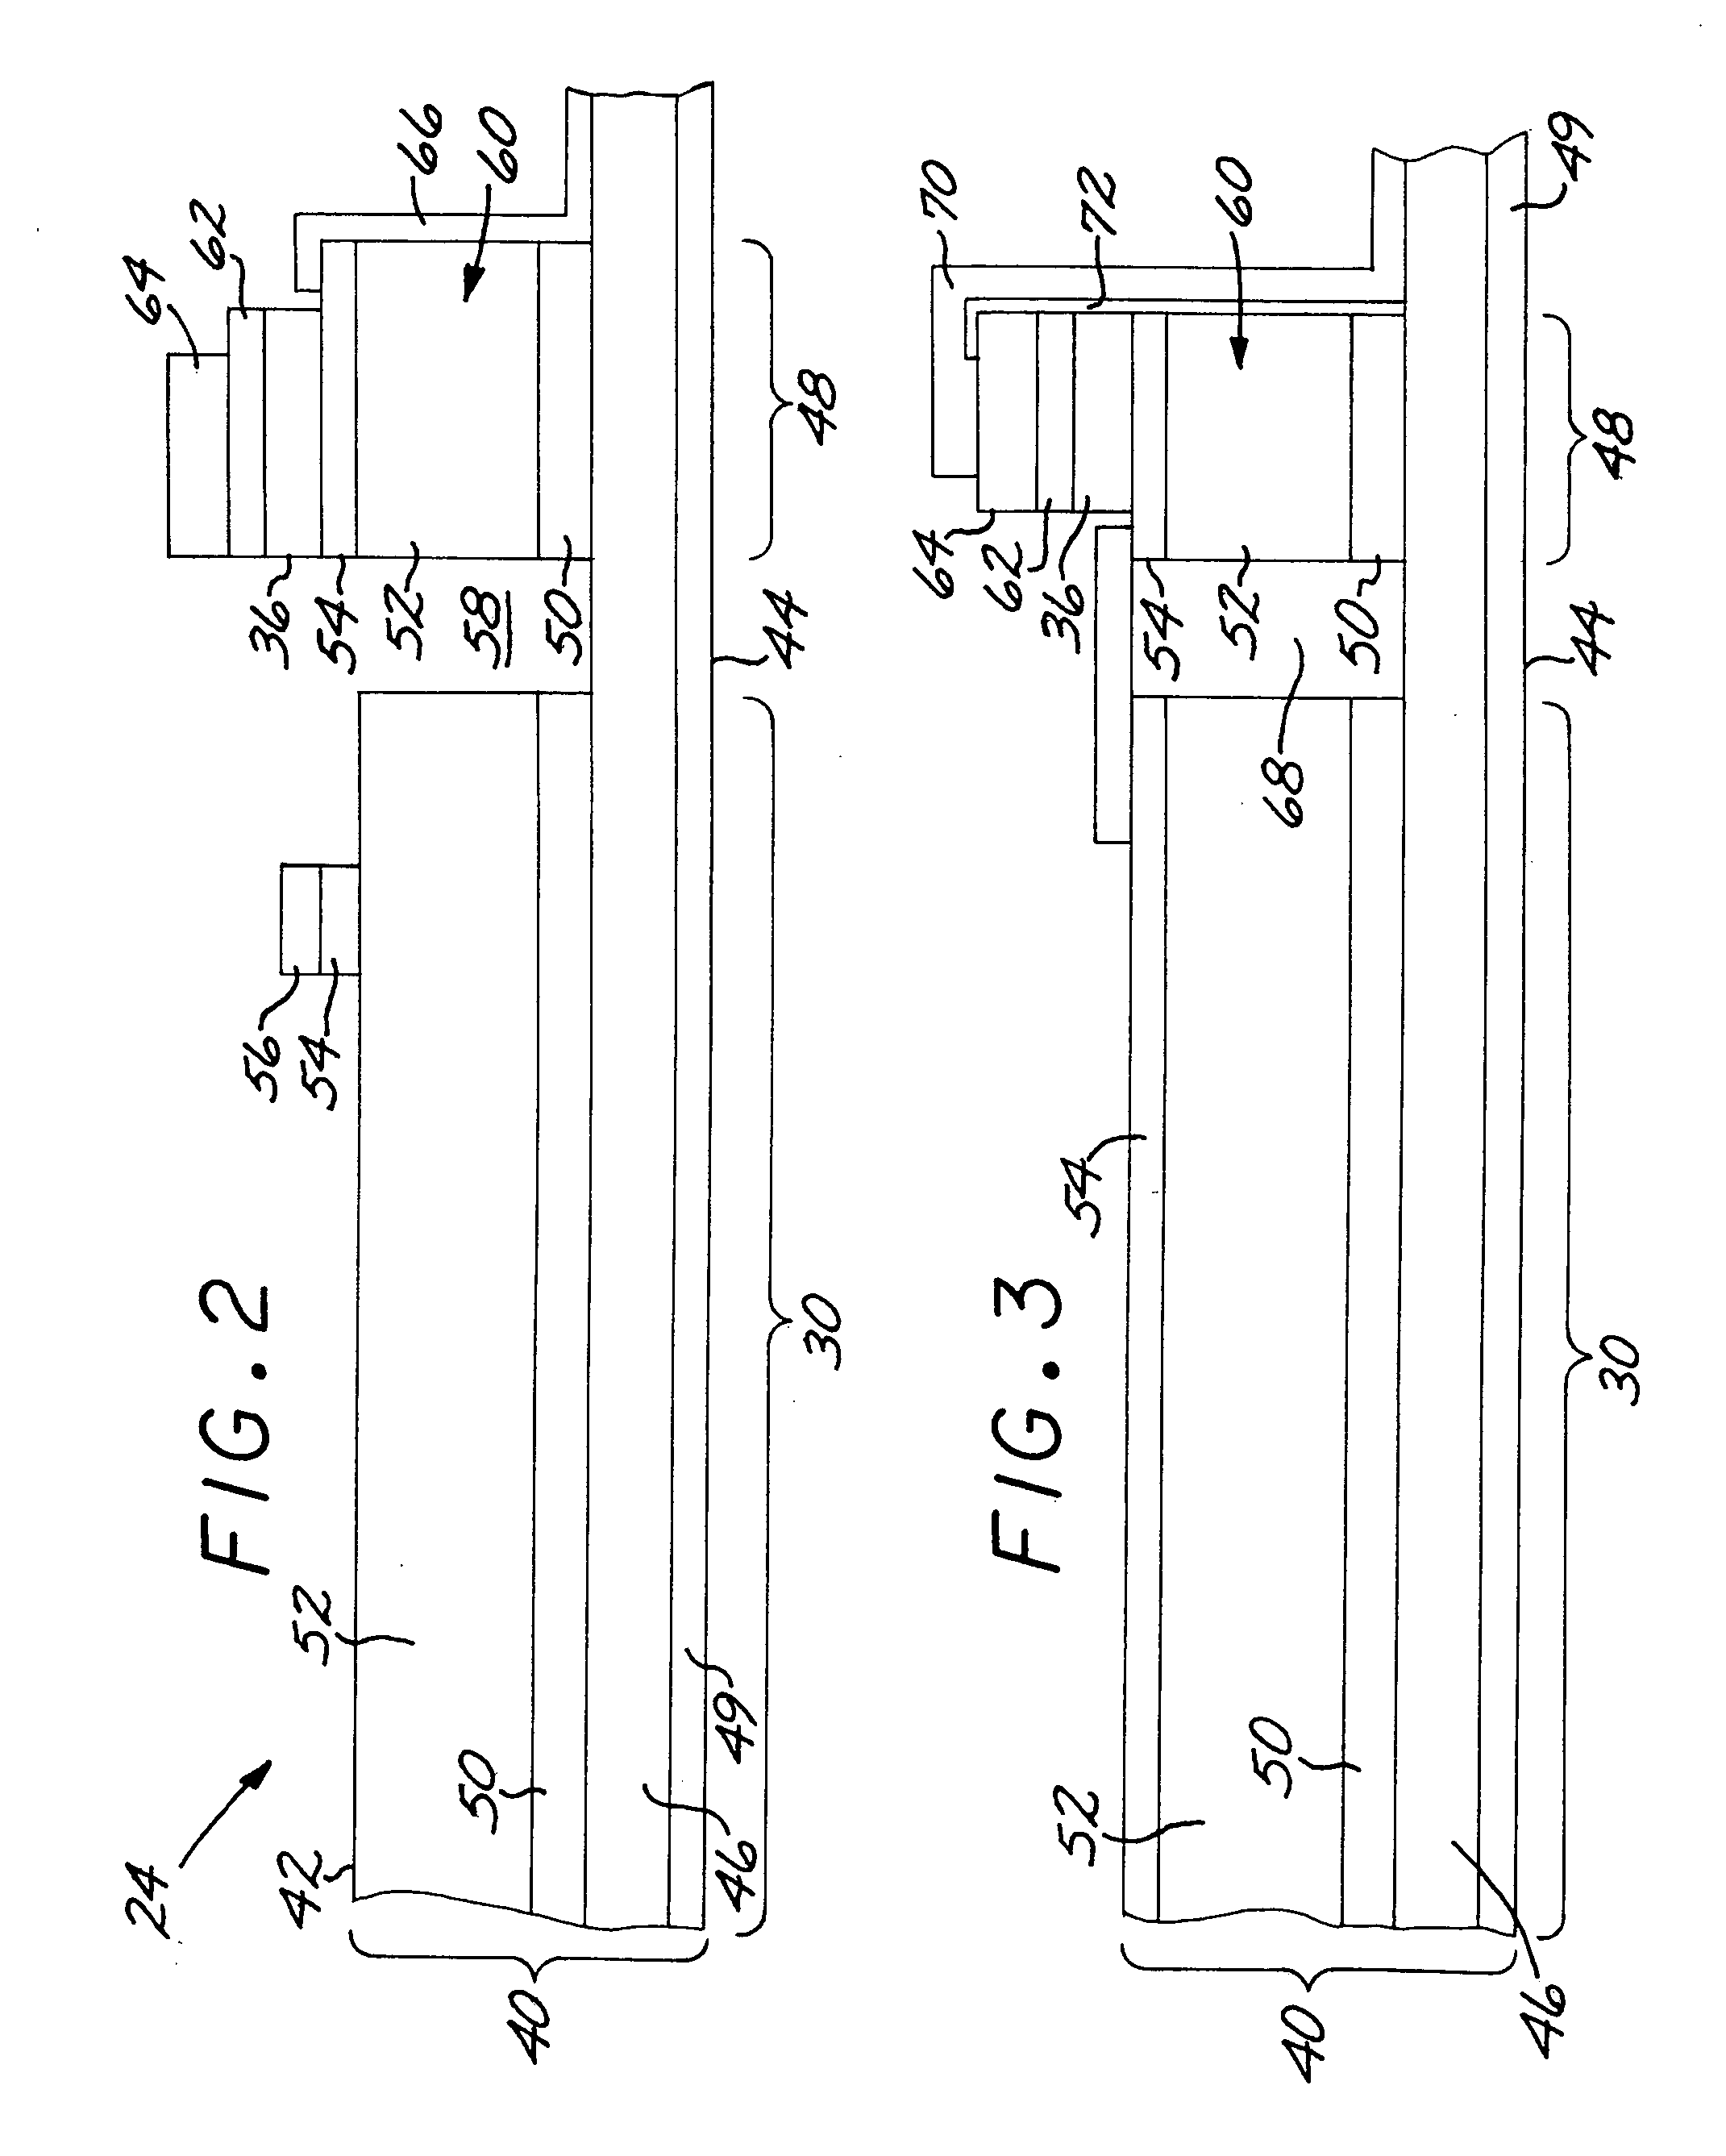 Solar cell array with isotype-heterojunction diode